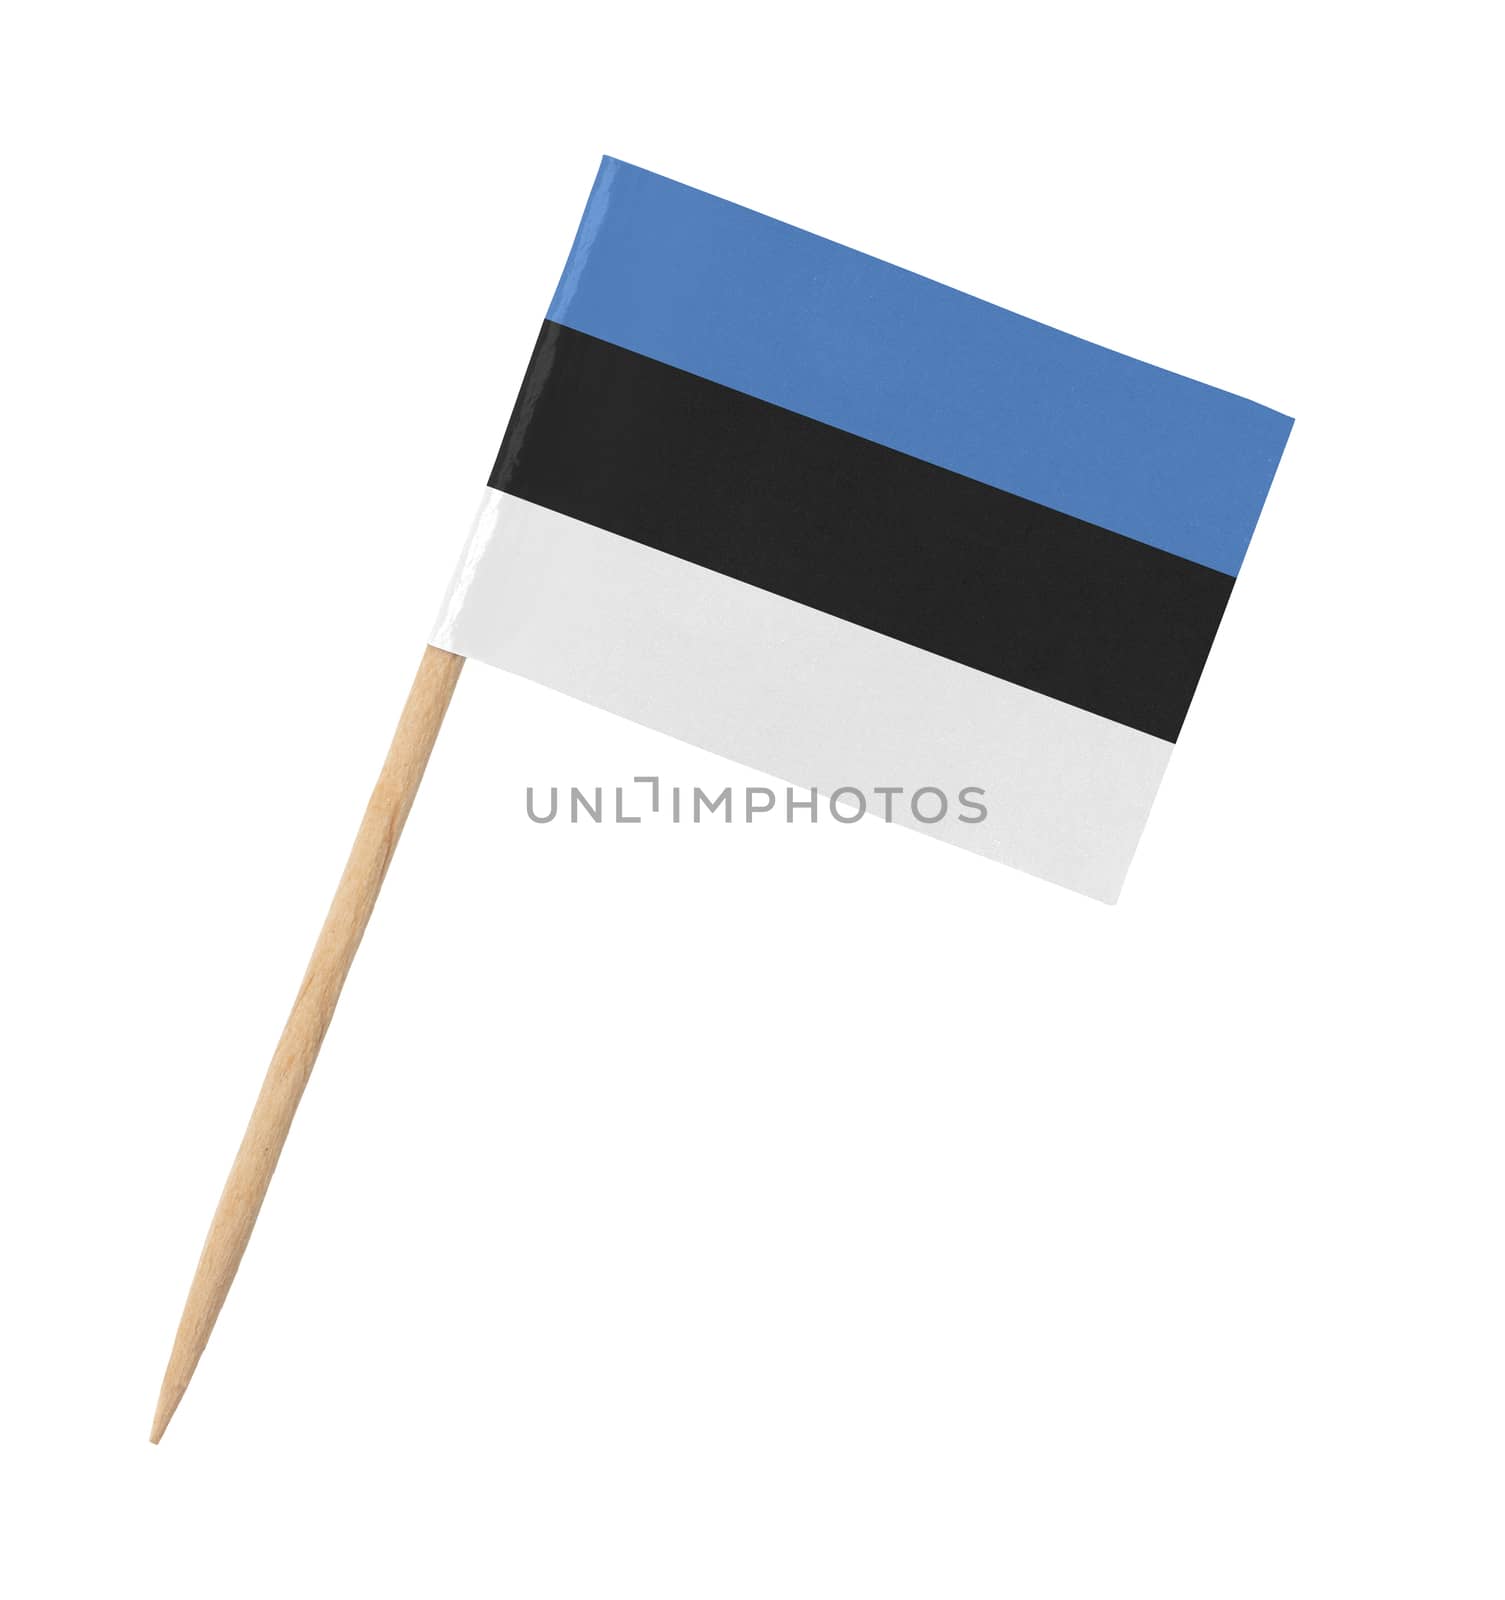 Small paper Estonian flag on wooden stick, isolated on white